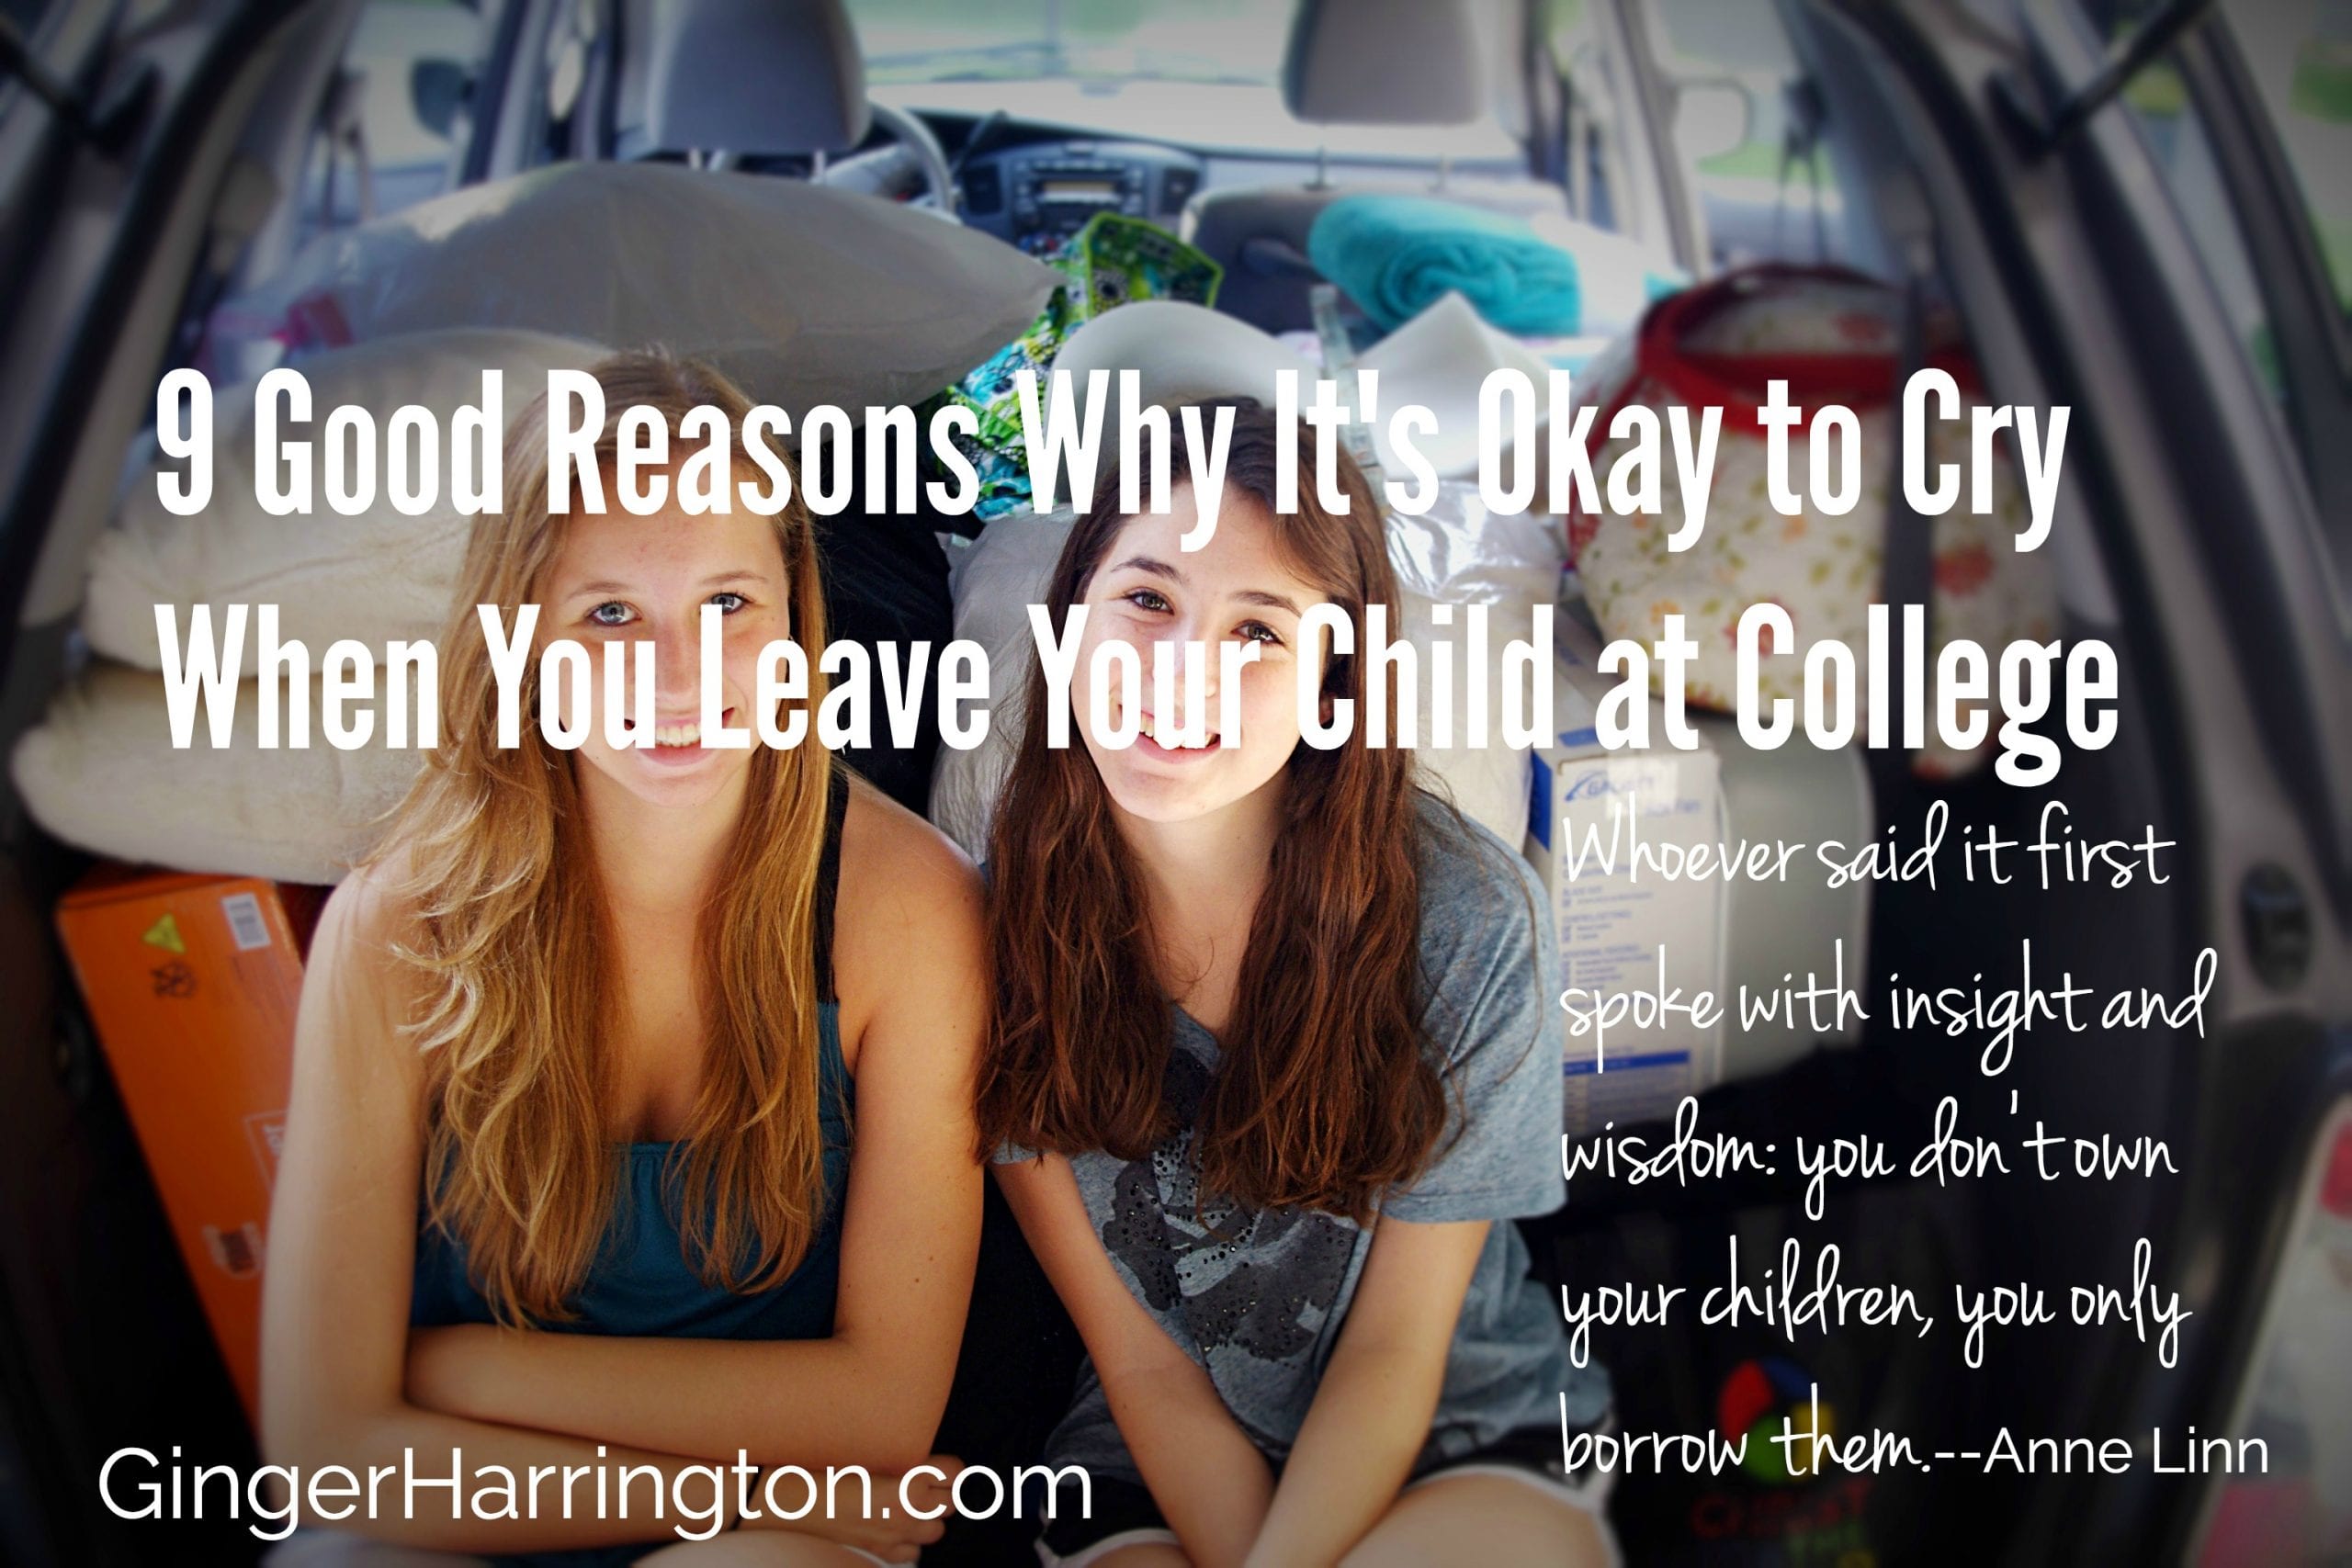 9 Good Reasons Why It’s Okay to Cry When You Leave Your Child at College